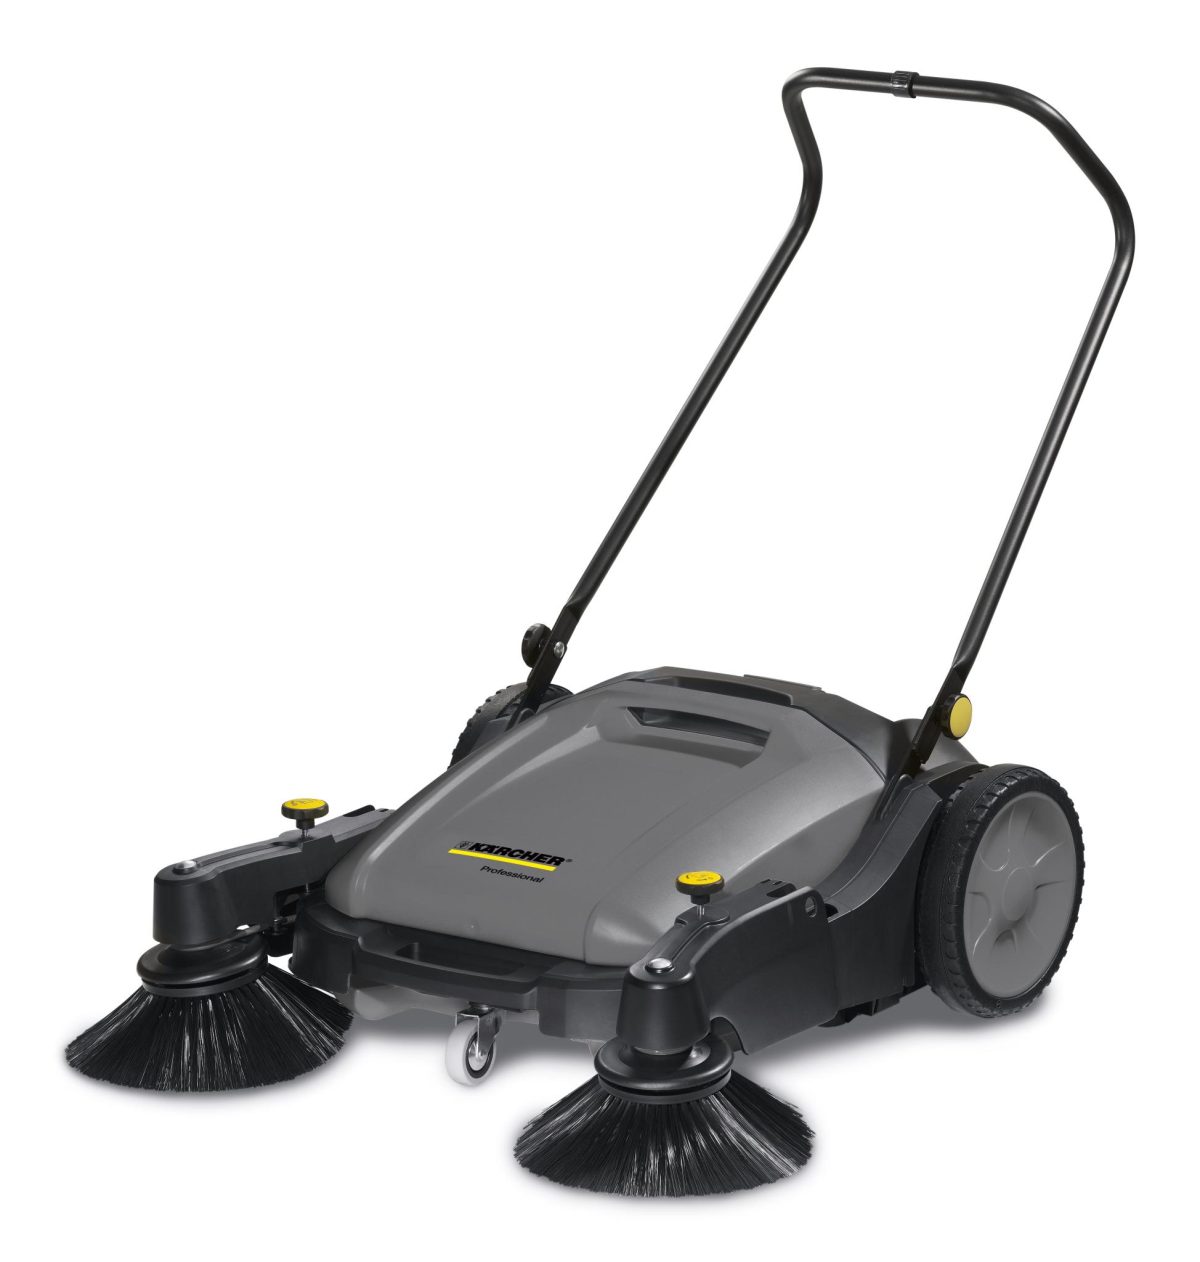 KM 70/20 C 2SB - Push Sweeper Sweeper with Twin Side Brushes